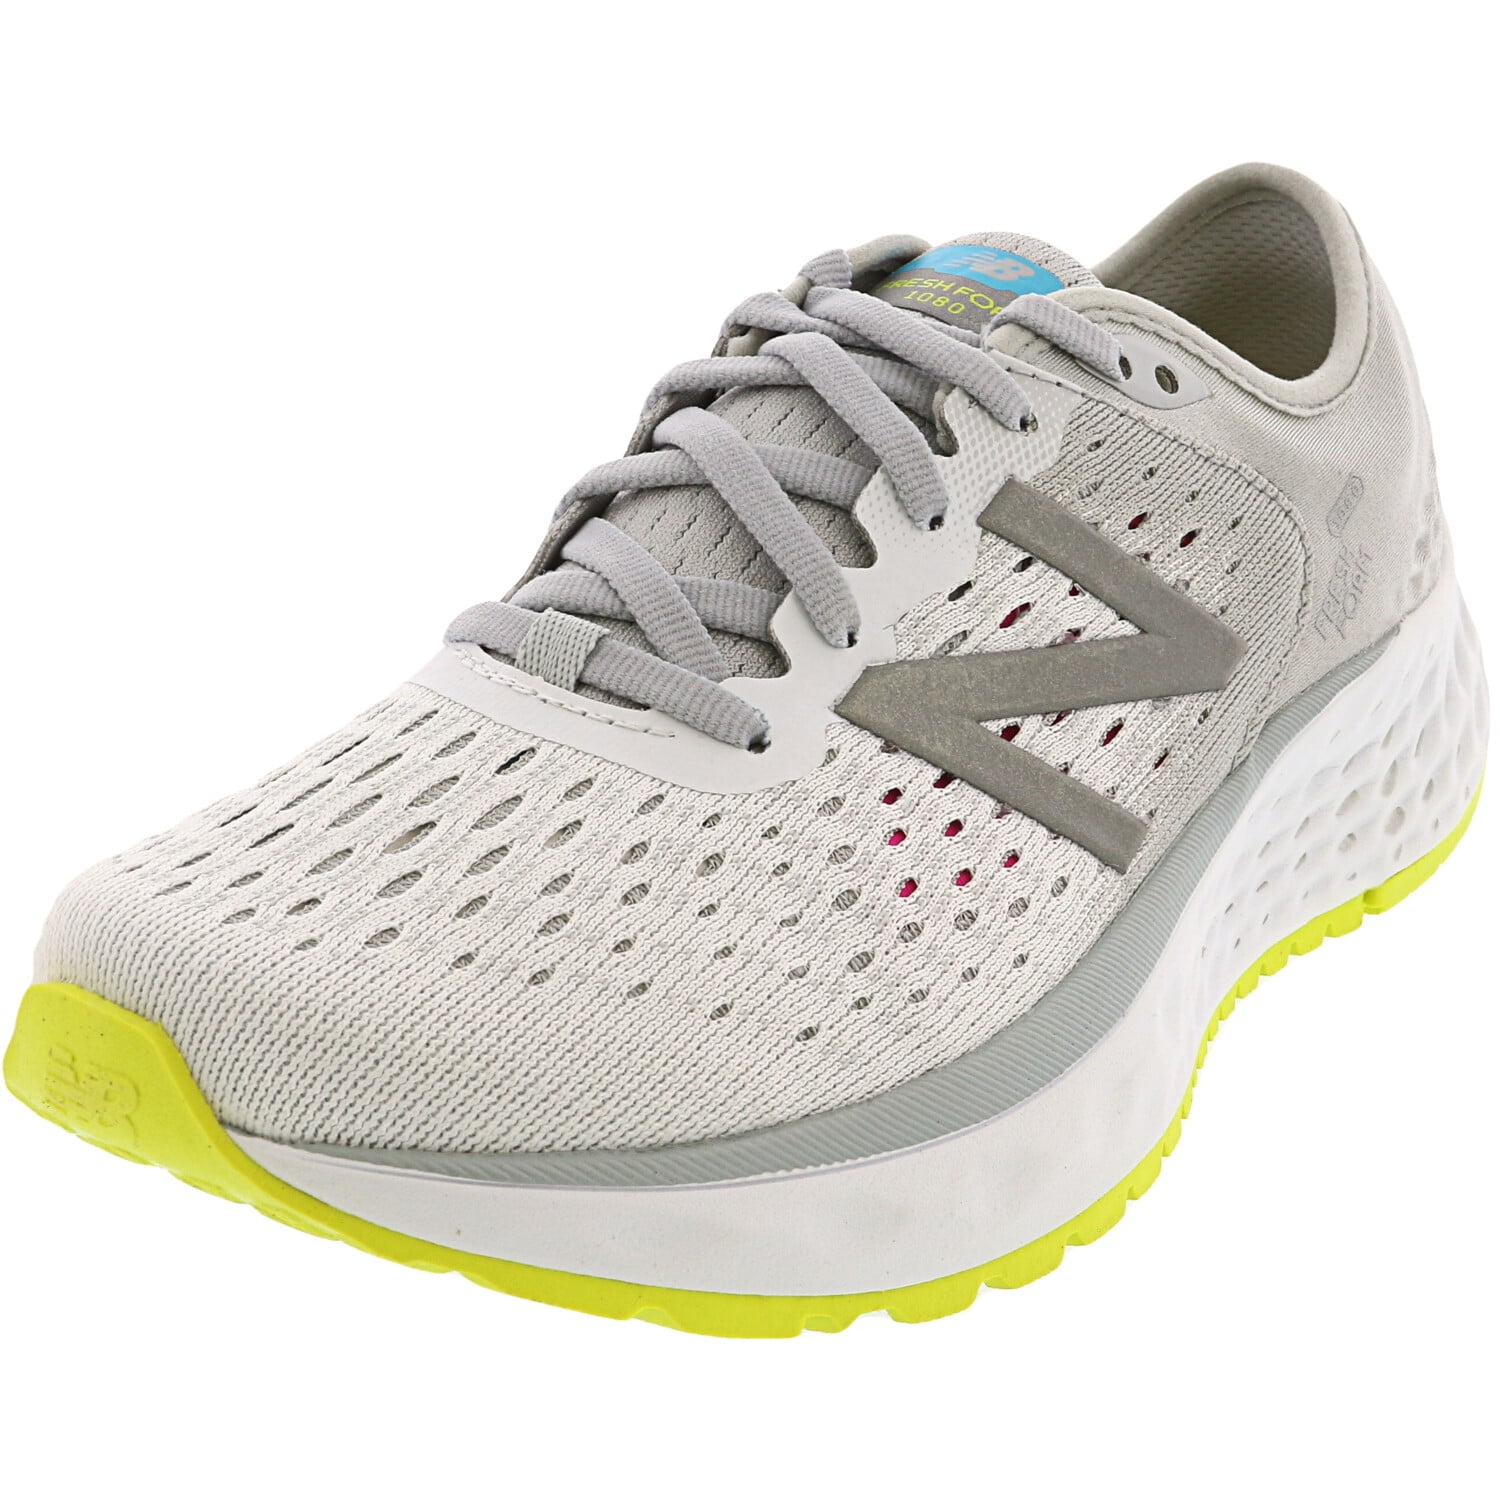 Kindness helicopter Residence New Balance Women's W1080 So9 Ankle-High Running - 6M - Walmart.com